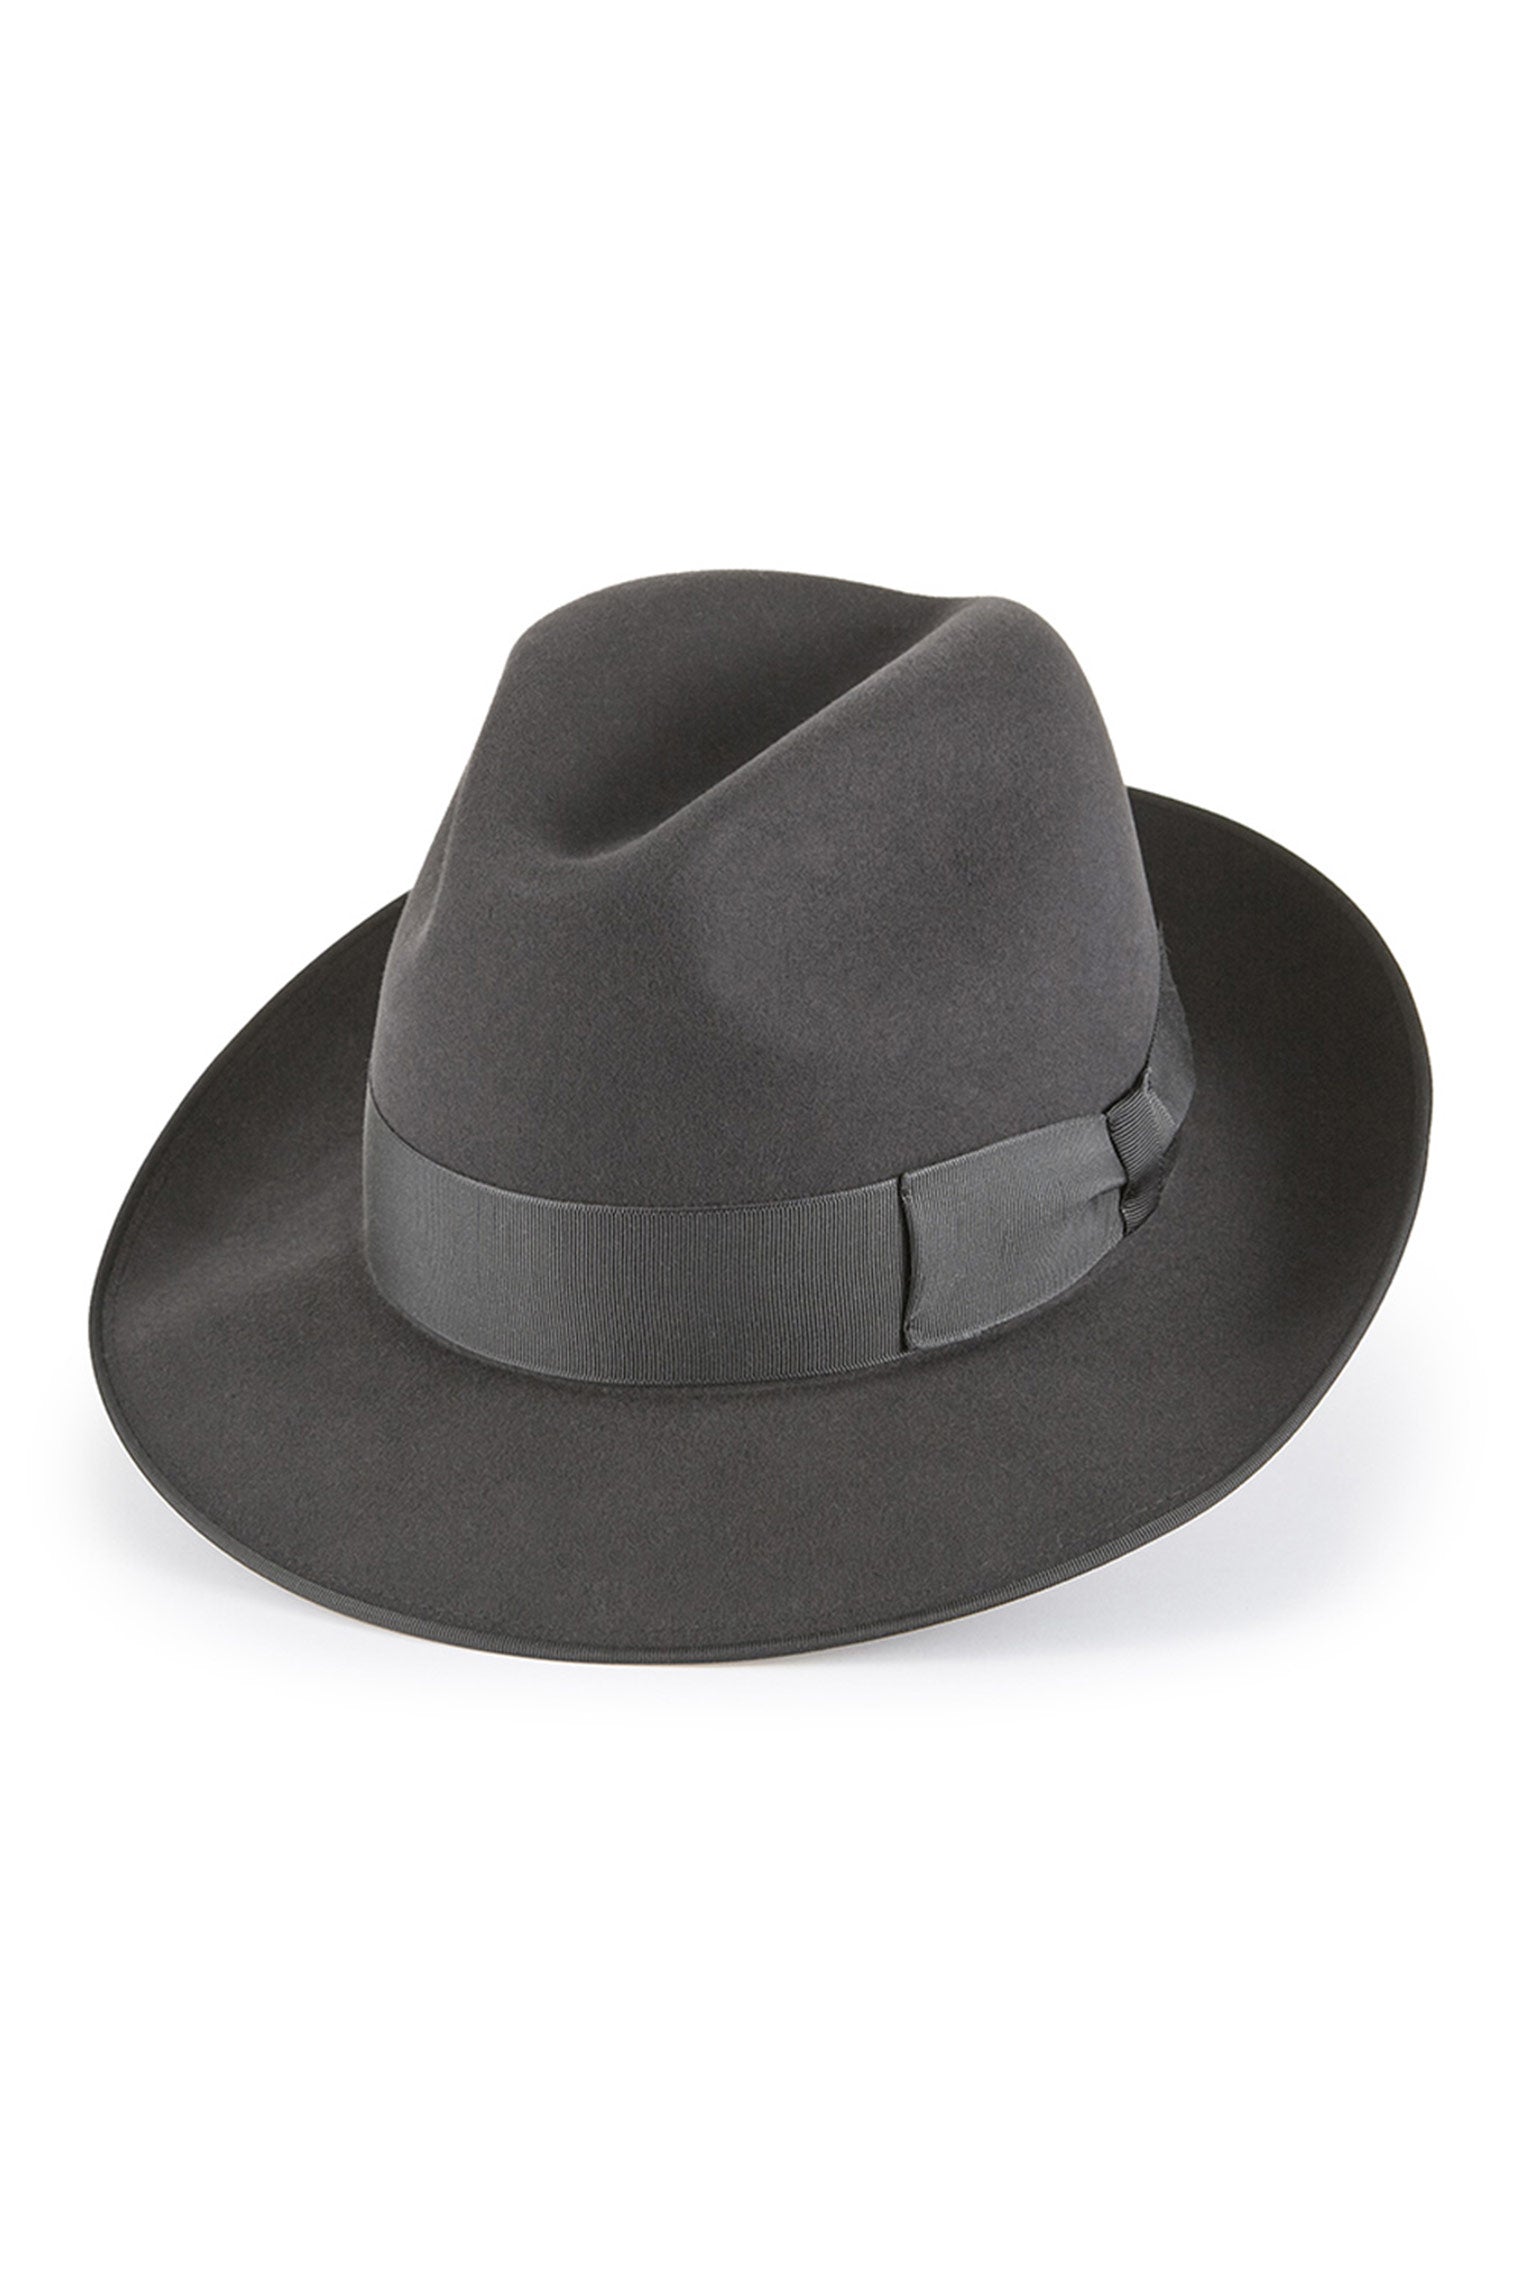 Escorial Wool Albany Trilby - Hats for Oval Face Shapes - Lock & Co. Hatters London UK